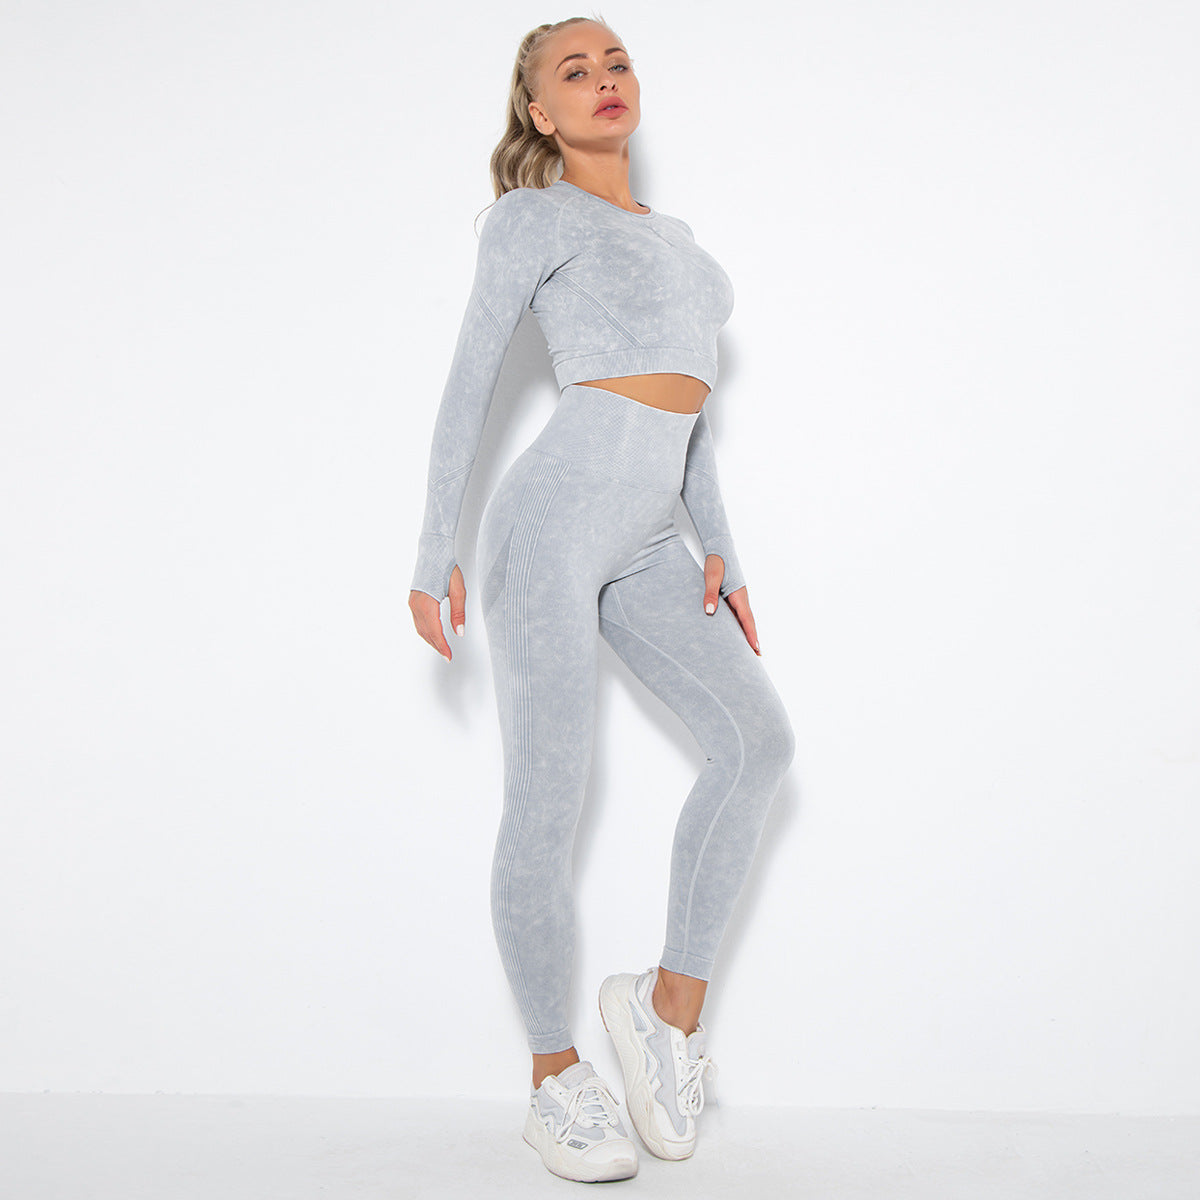 Seamless Washed Peach Hip Raise Yoga Suit Sports Running Workout Outfit Sexy Yoga Pants